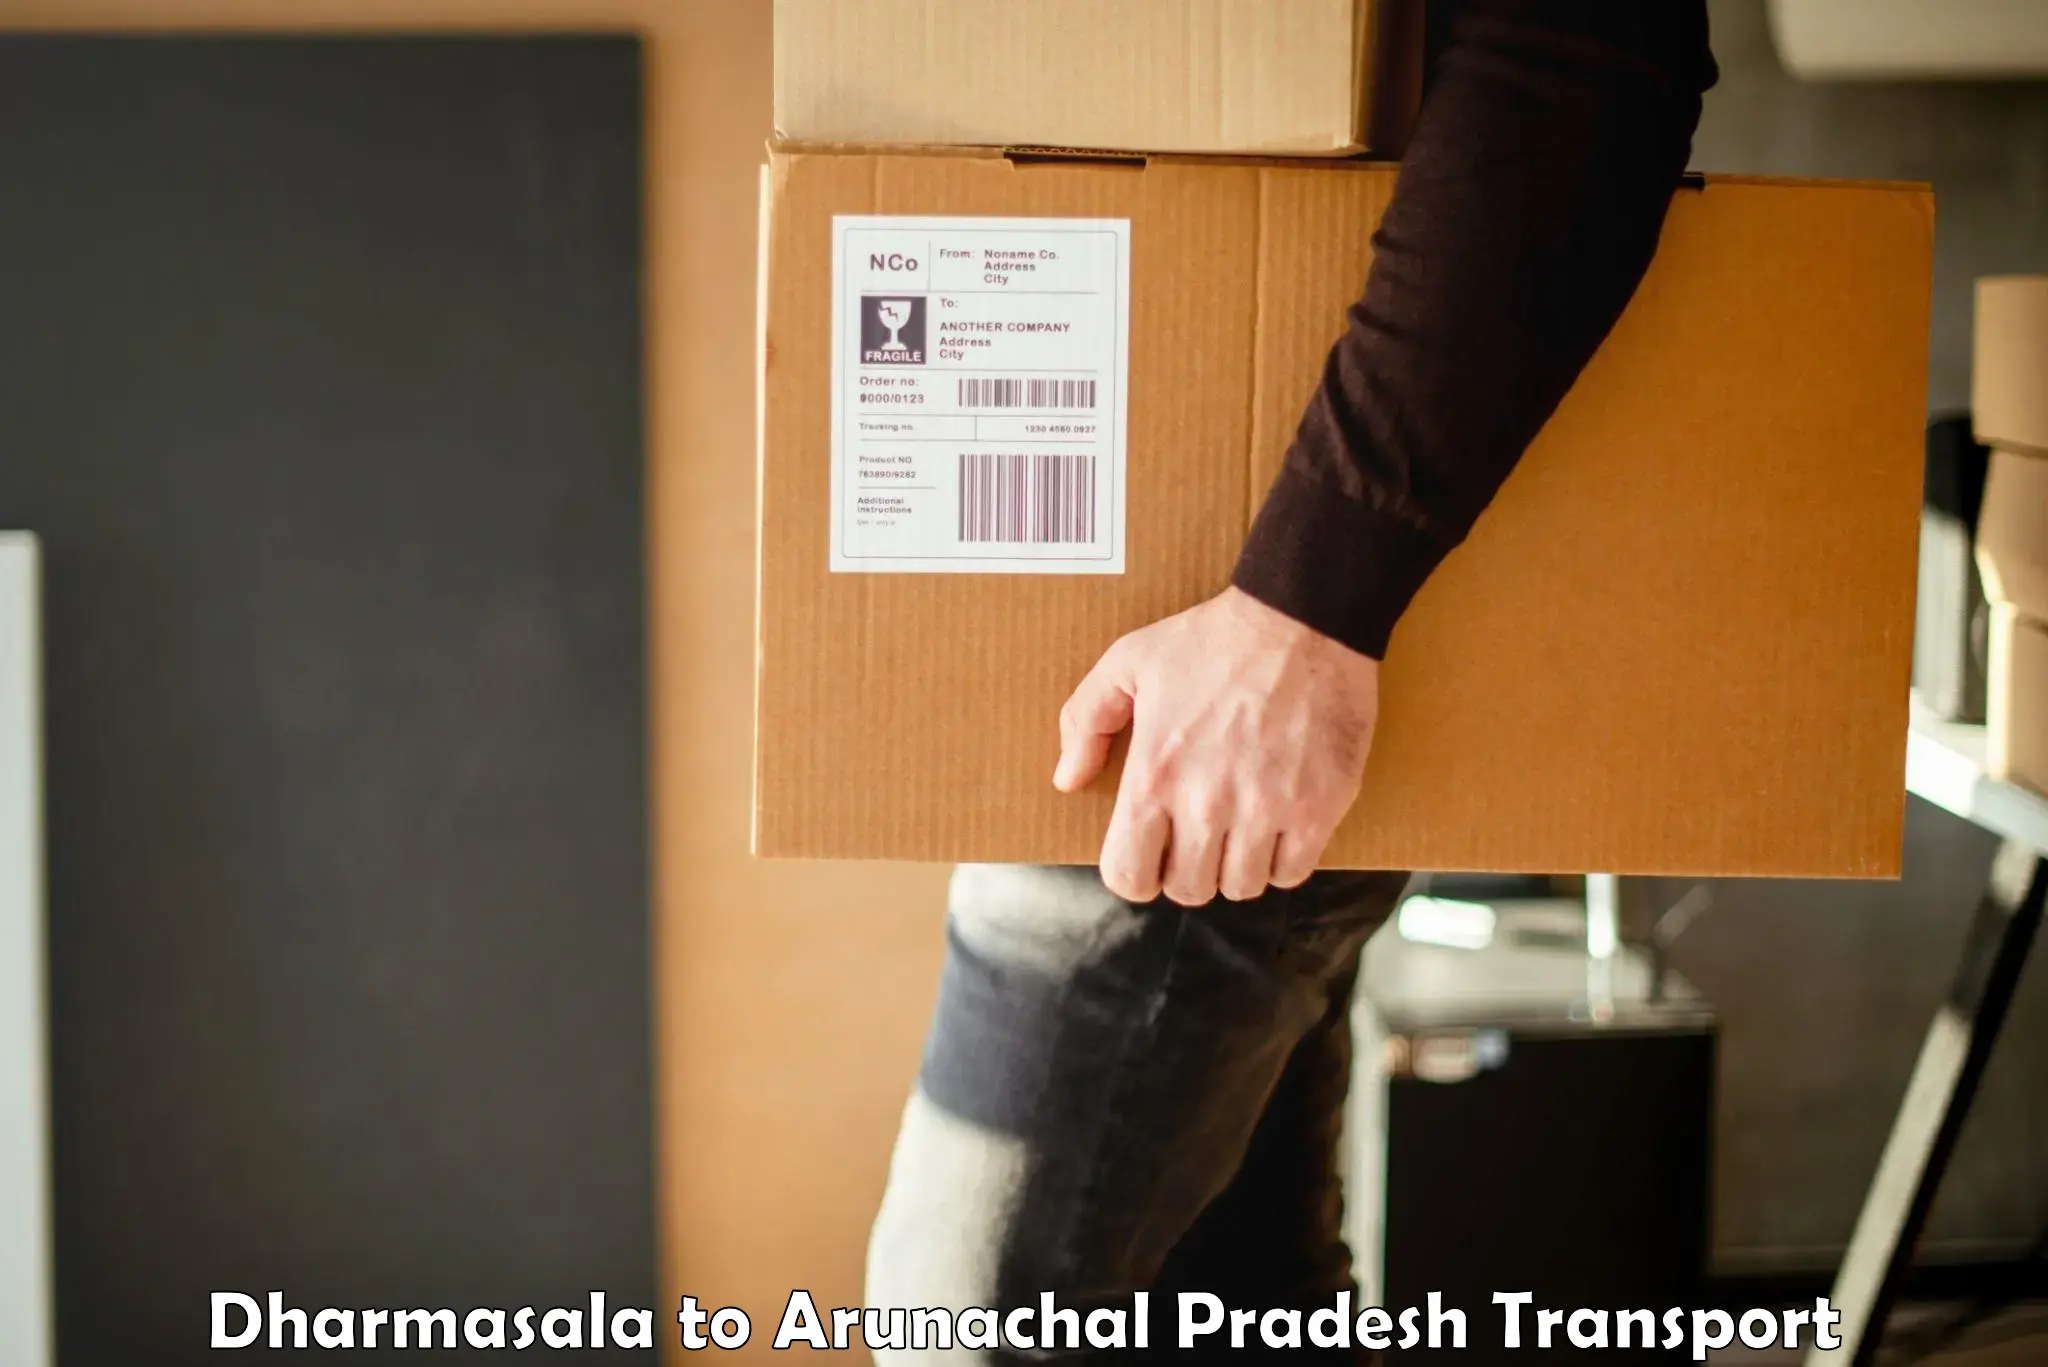 Truck transport companies in India Dharmasala to Deomali